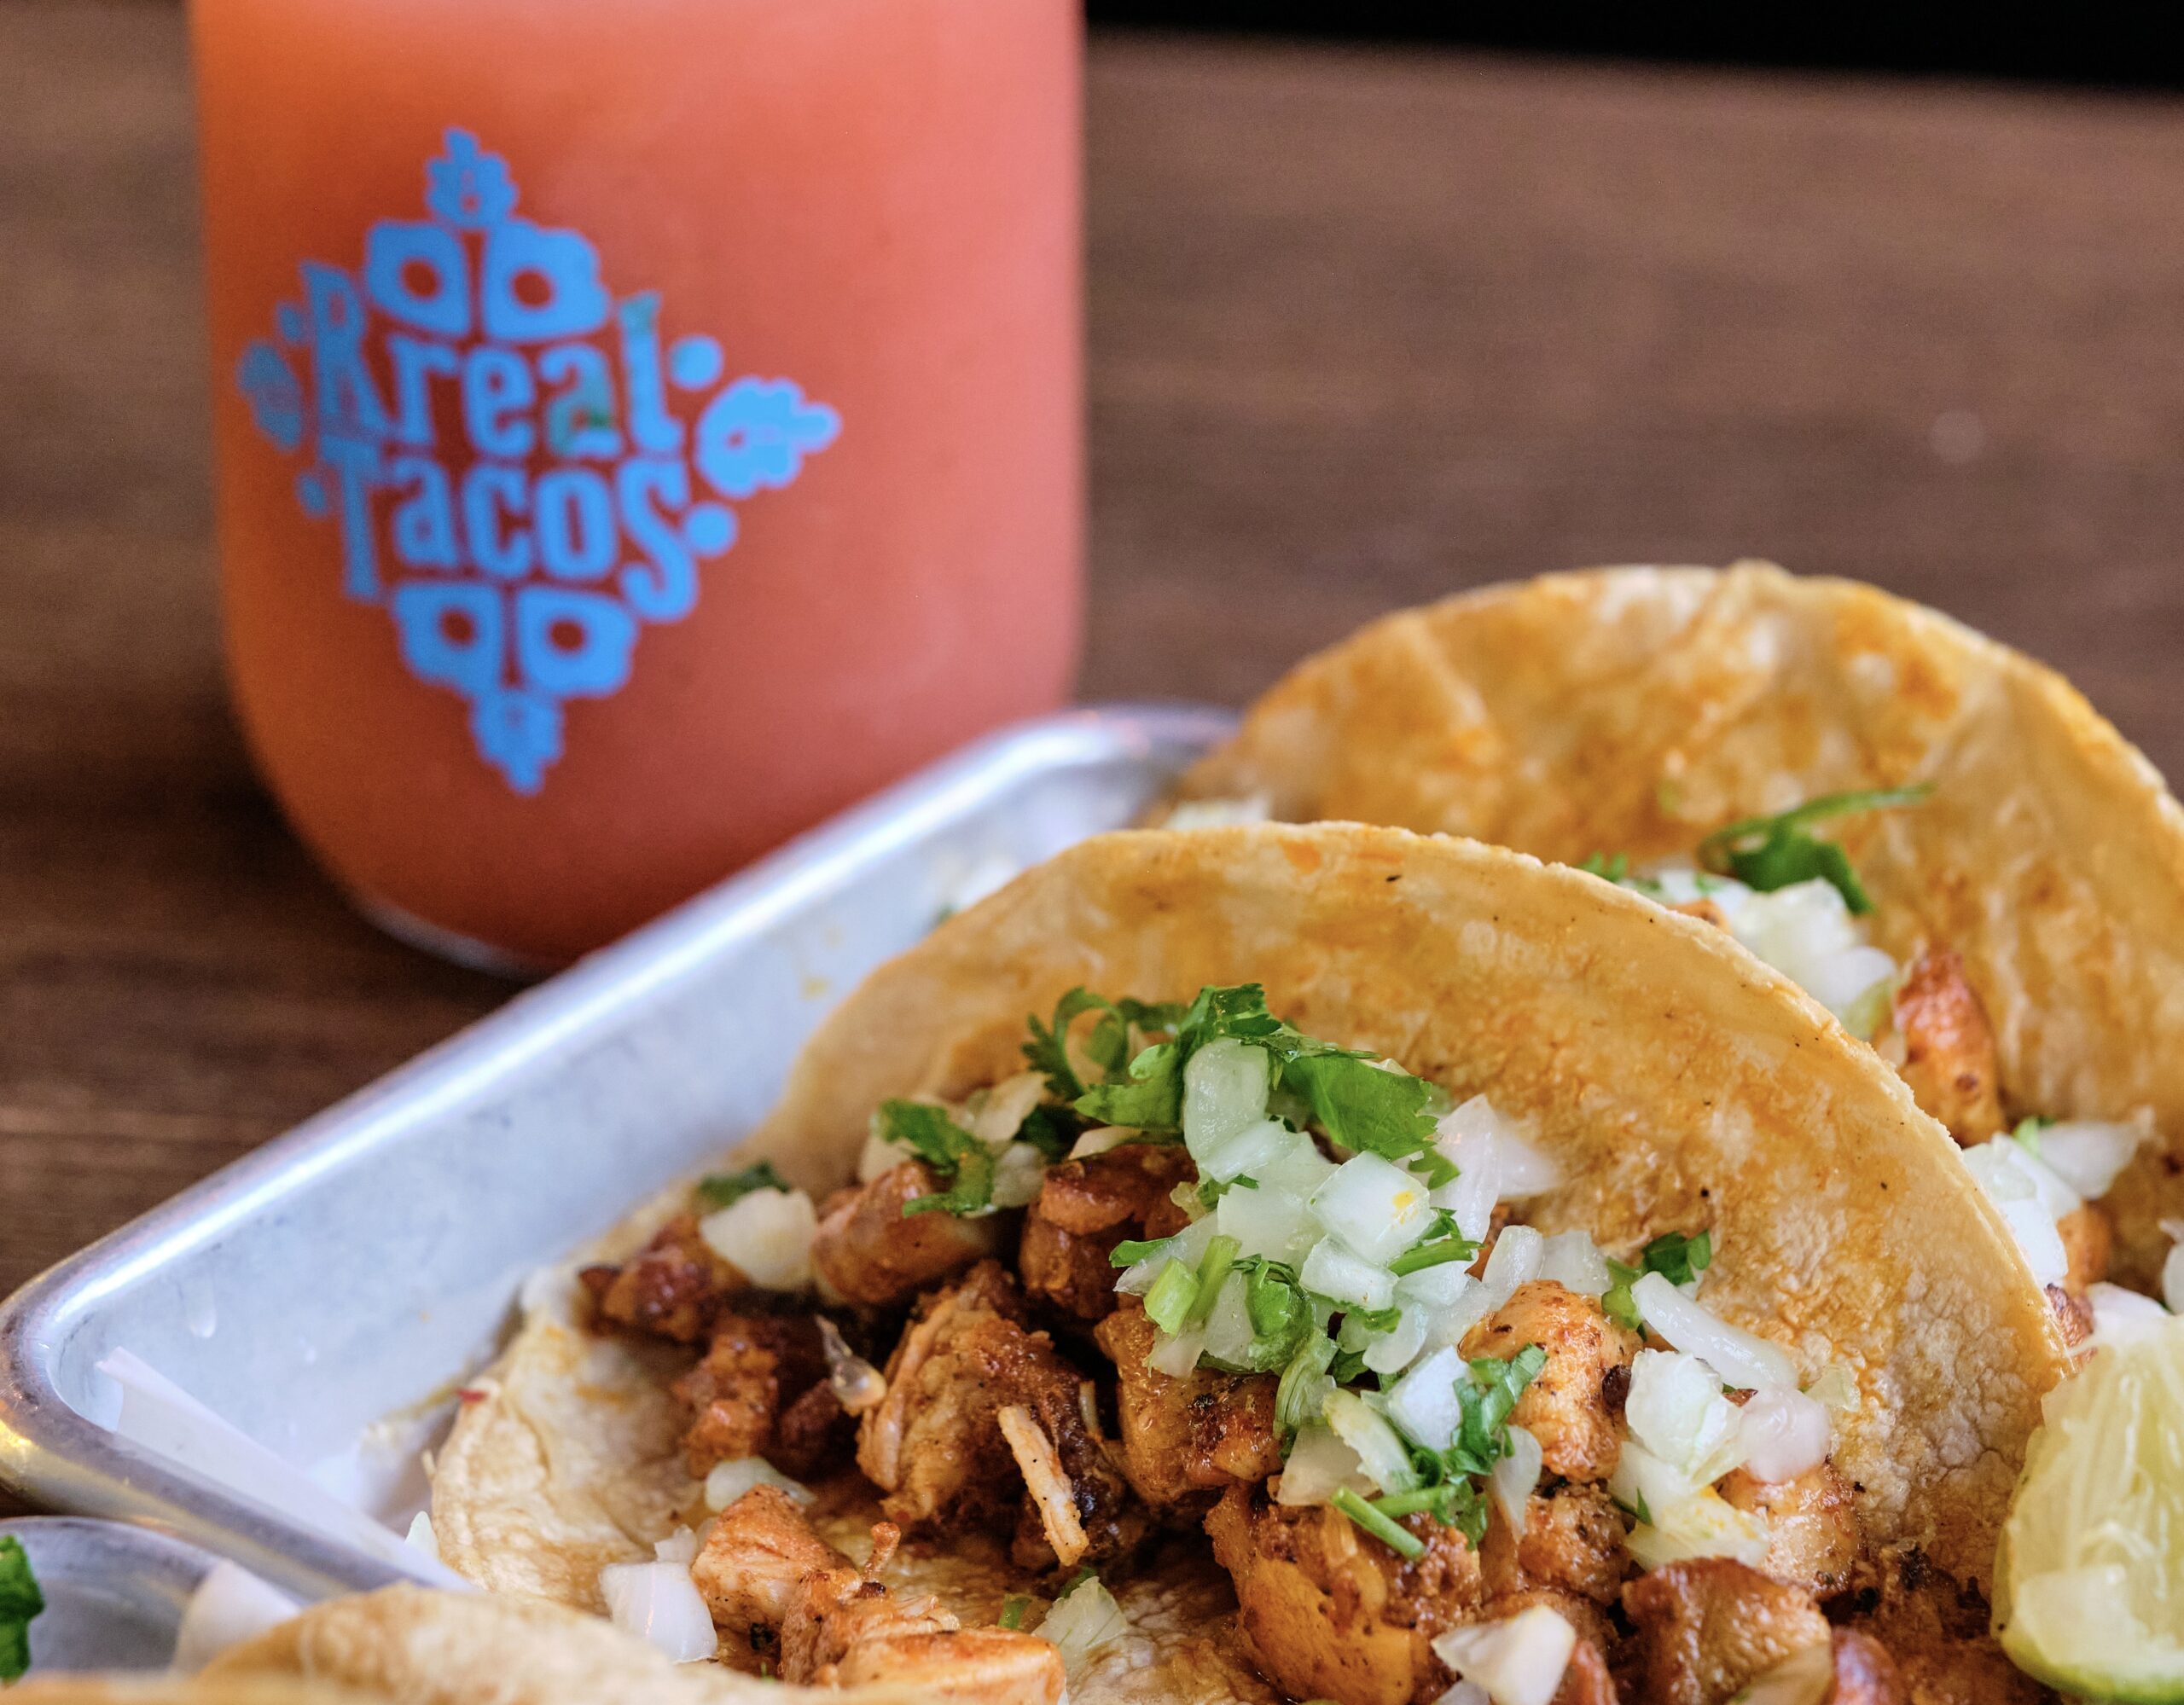 Rreal Tacos Ignites Explosive Growth with New Location Opening in Atlanta’s Sugar Hill Area!